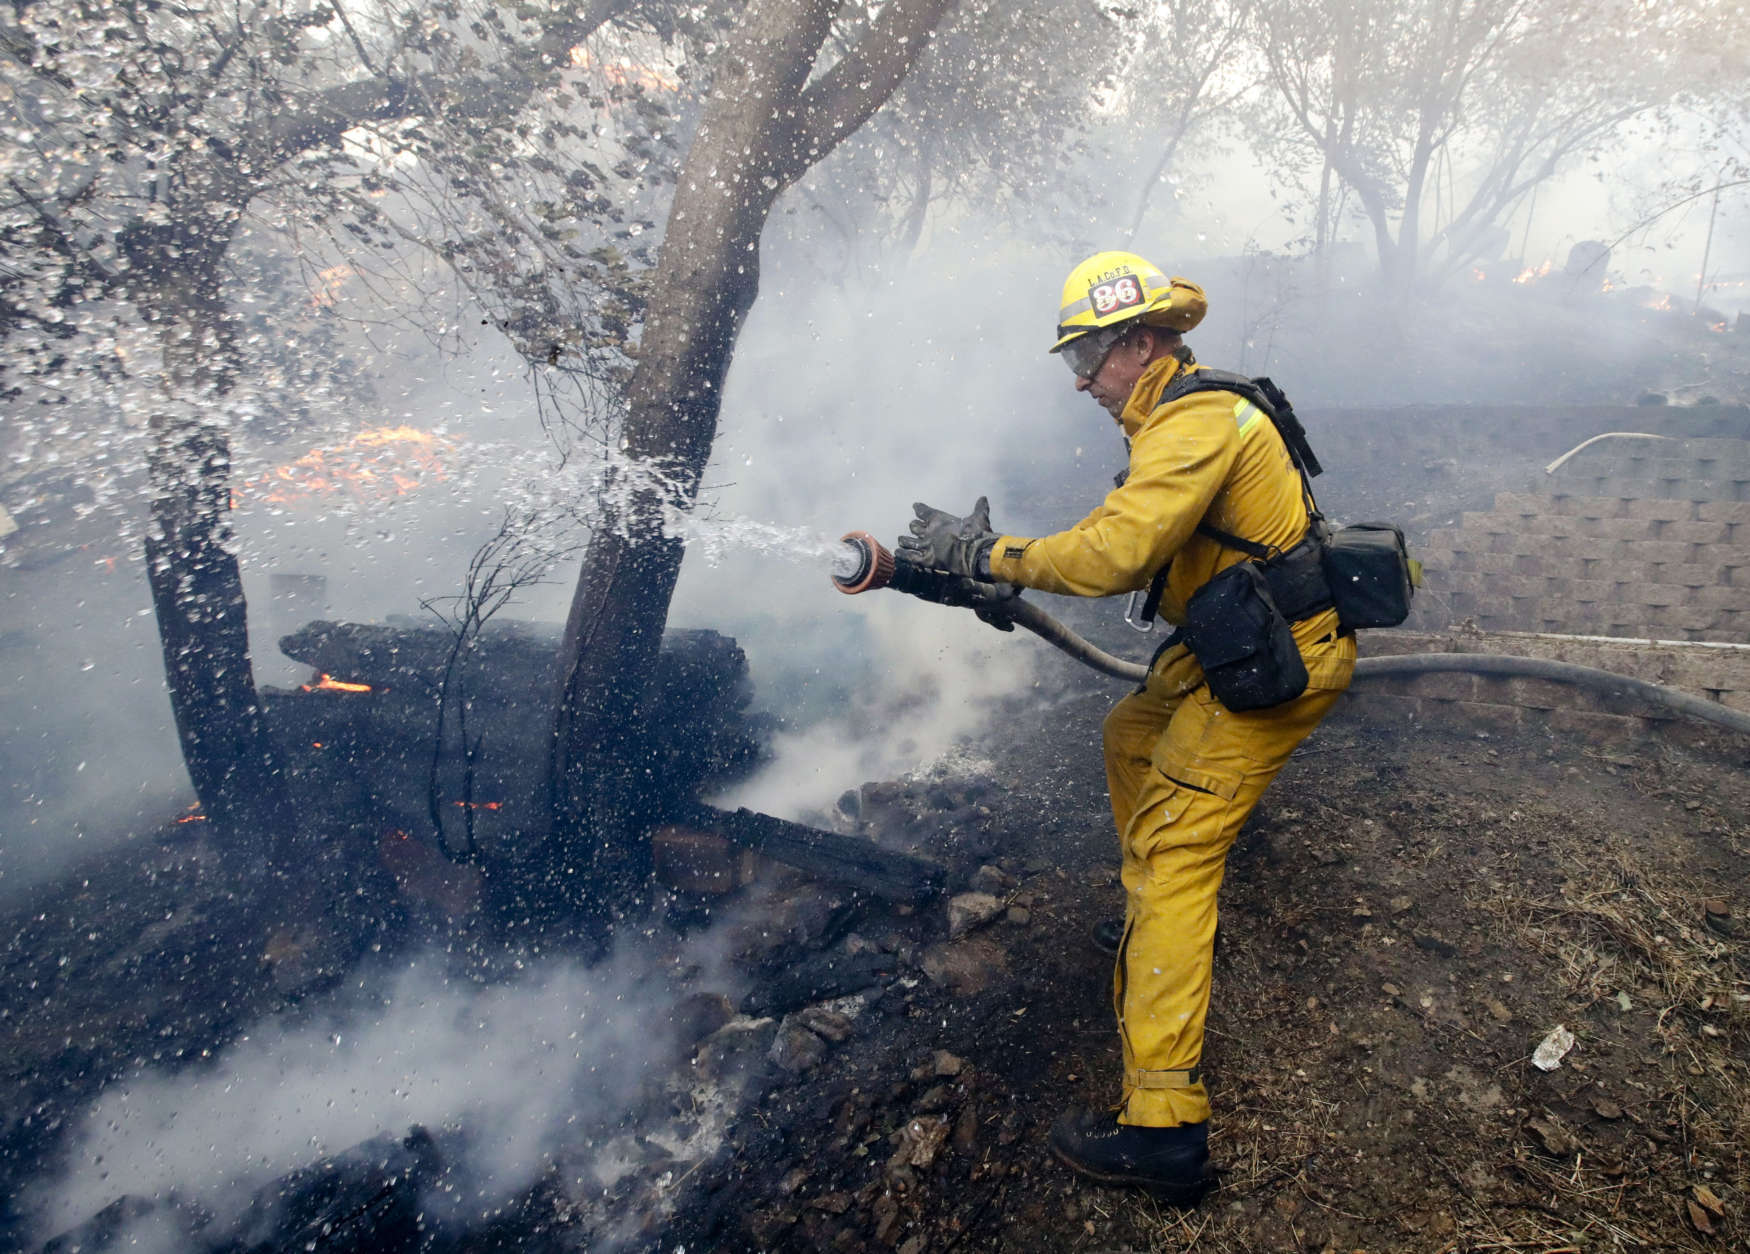 A Los Angeles County firefighter battles a wildfire in the Lake View Terrace area of Los Angeles, Tuesday, Dec. 5, 2017. Ferocious winds in Southern California have whipped up explosive wildfires, burning a psychiatric hospital and scores of other structures. (AP Photo/Chris Carlson)